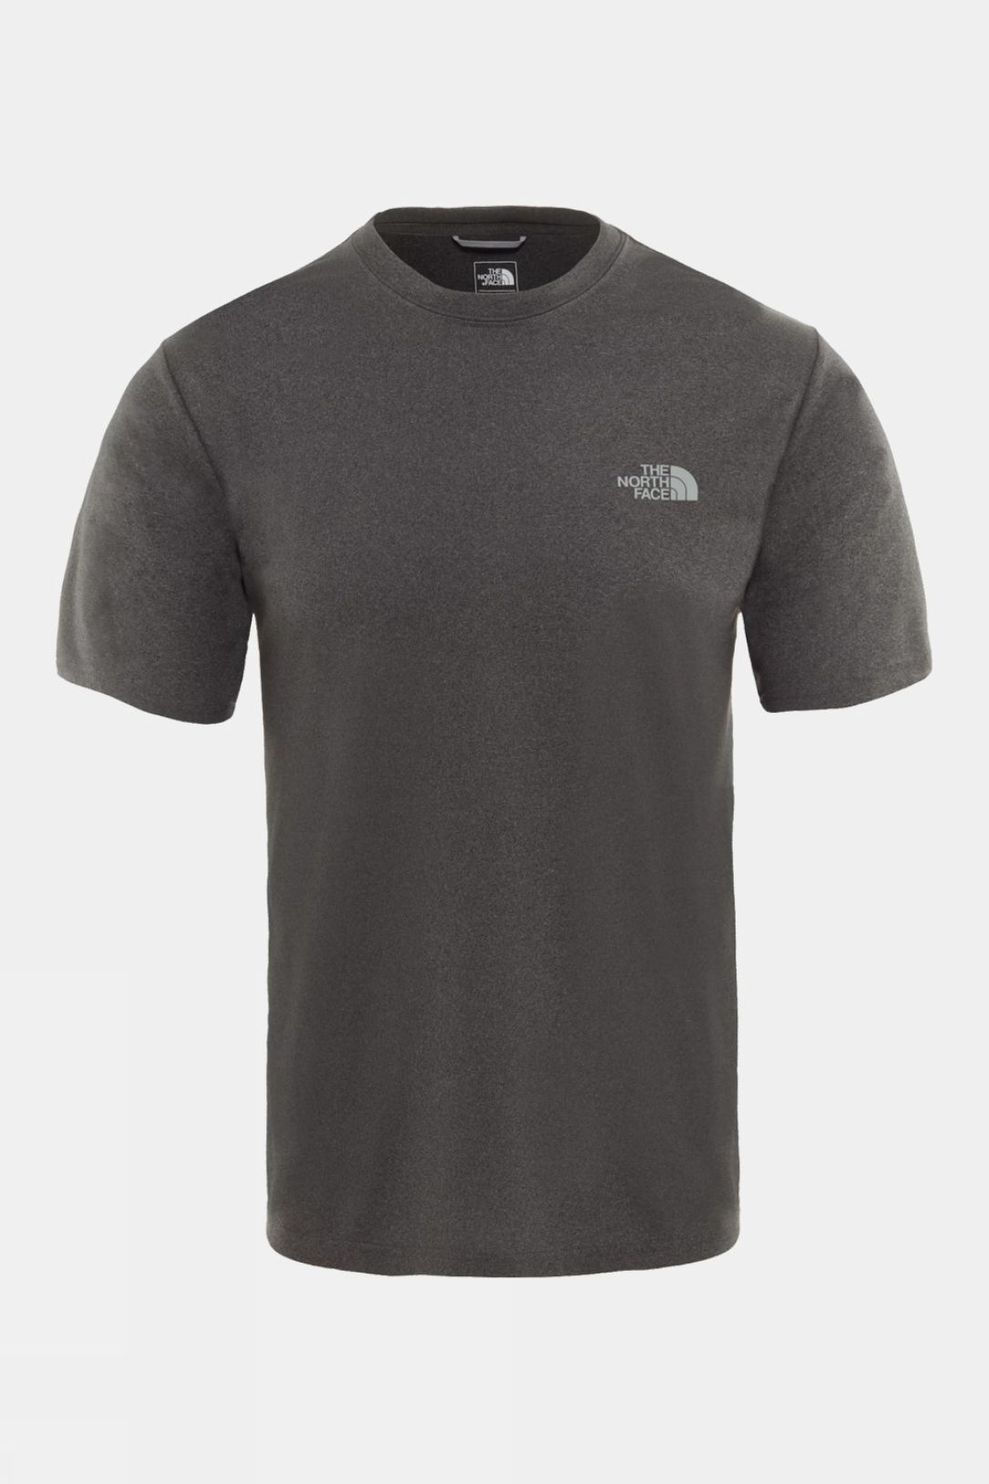 The North Face Mens Reaxion Amp Tee